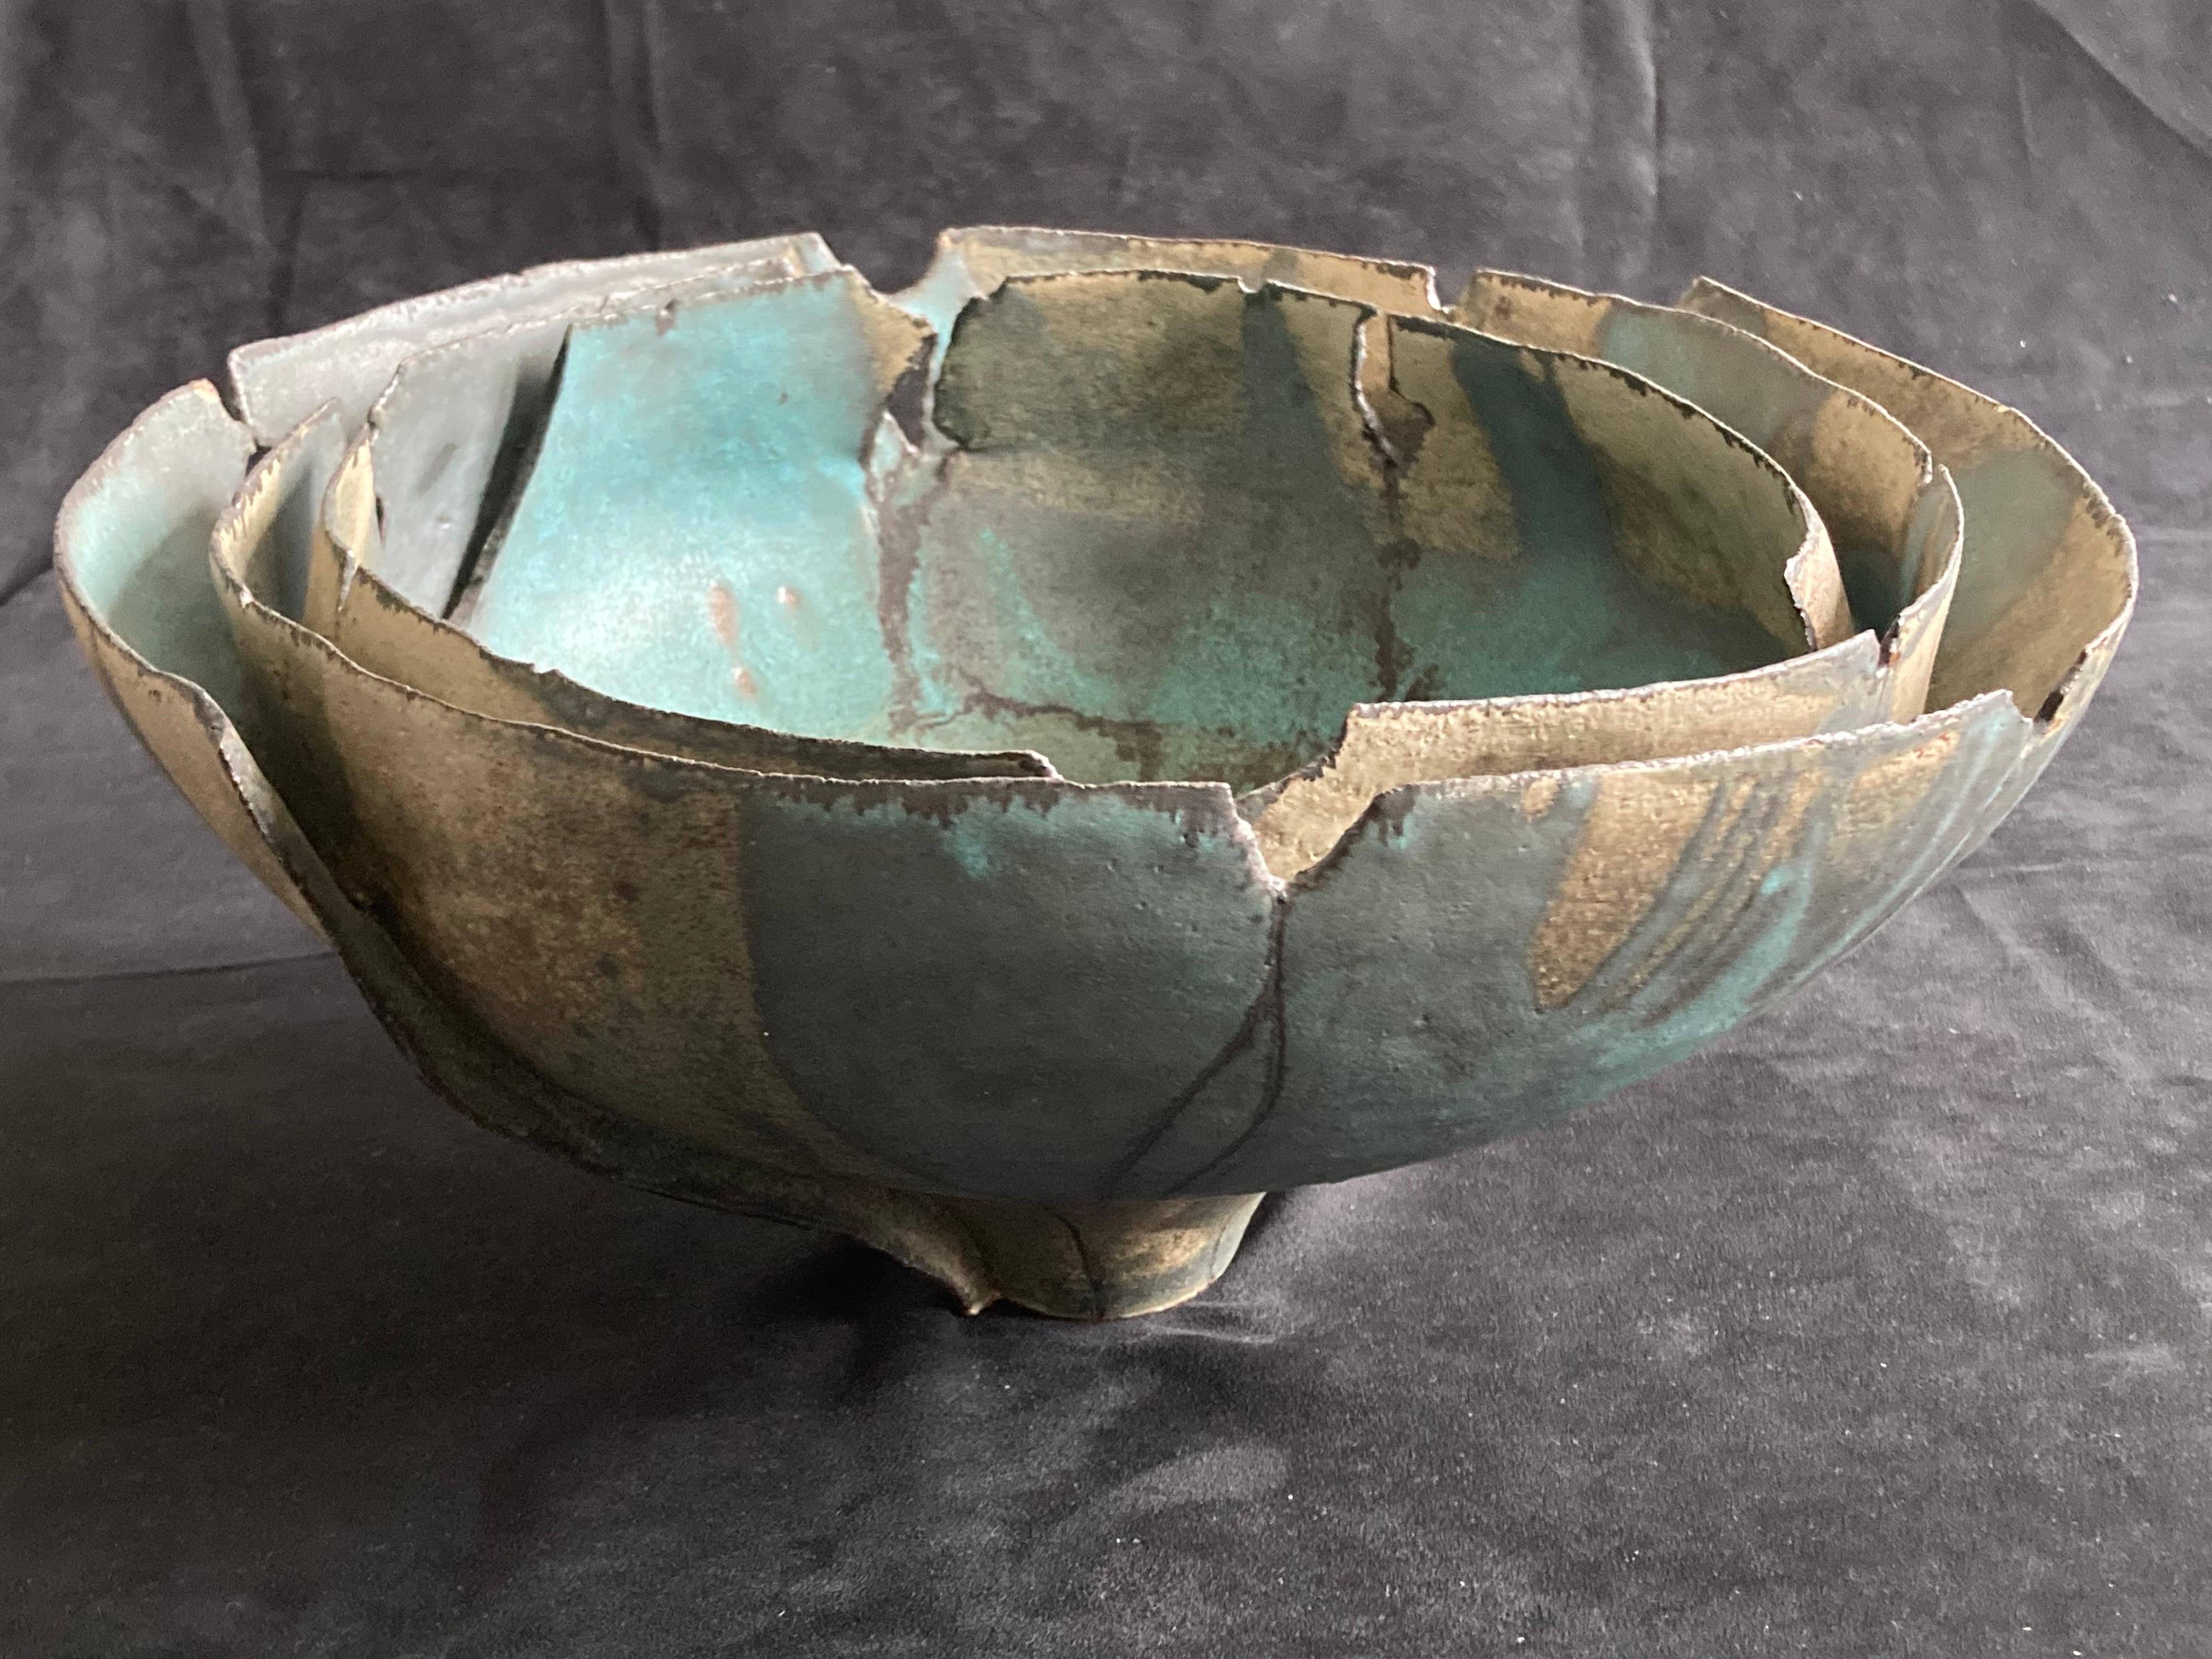 Sheila Fournier (British 1930-2000), large studio pottery bowl.

Hand built multi layered with green and grey running glazes.

Artist studio stamp under.

Sheila Fournier married Robert Charles Privet Fournier in 1961. She
was trained as a